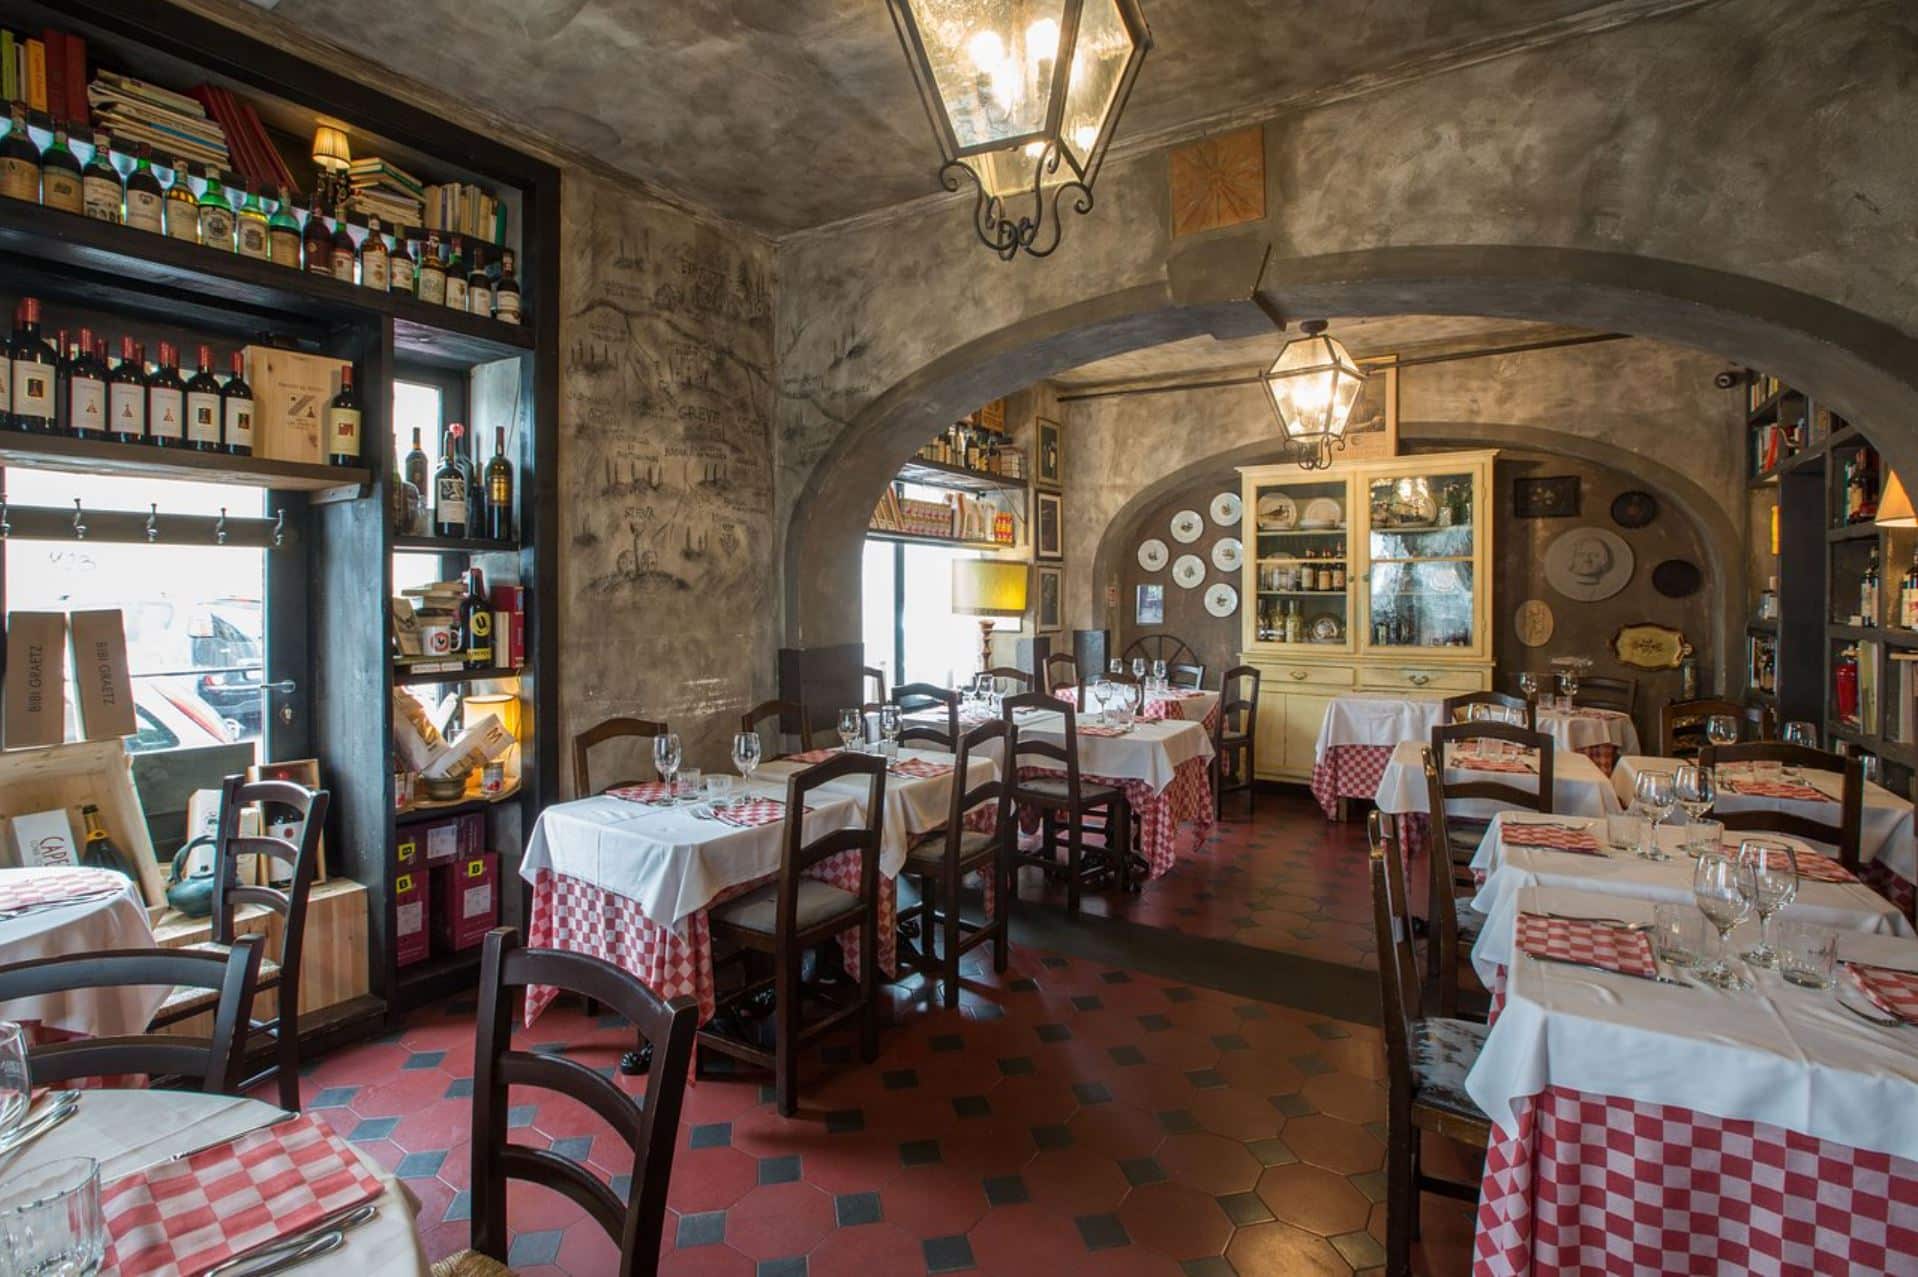 See Image of Antica Osteria Toscana Firenze